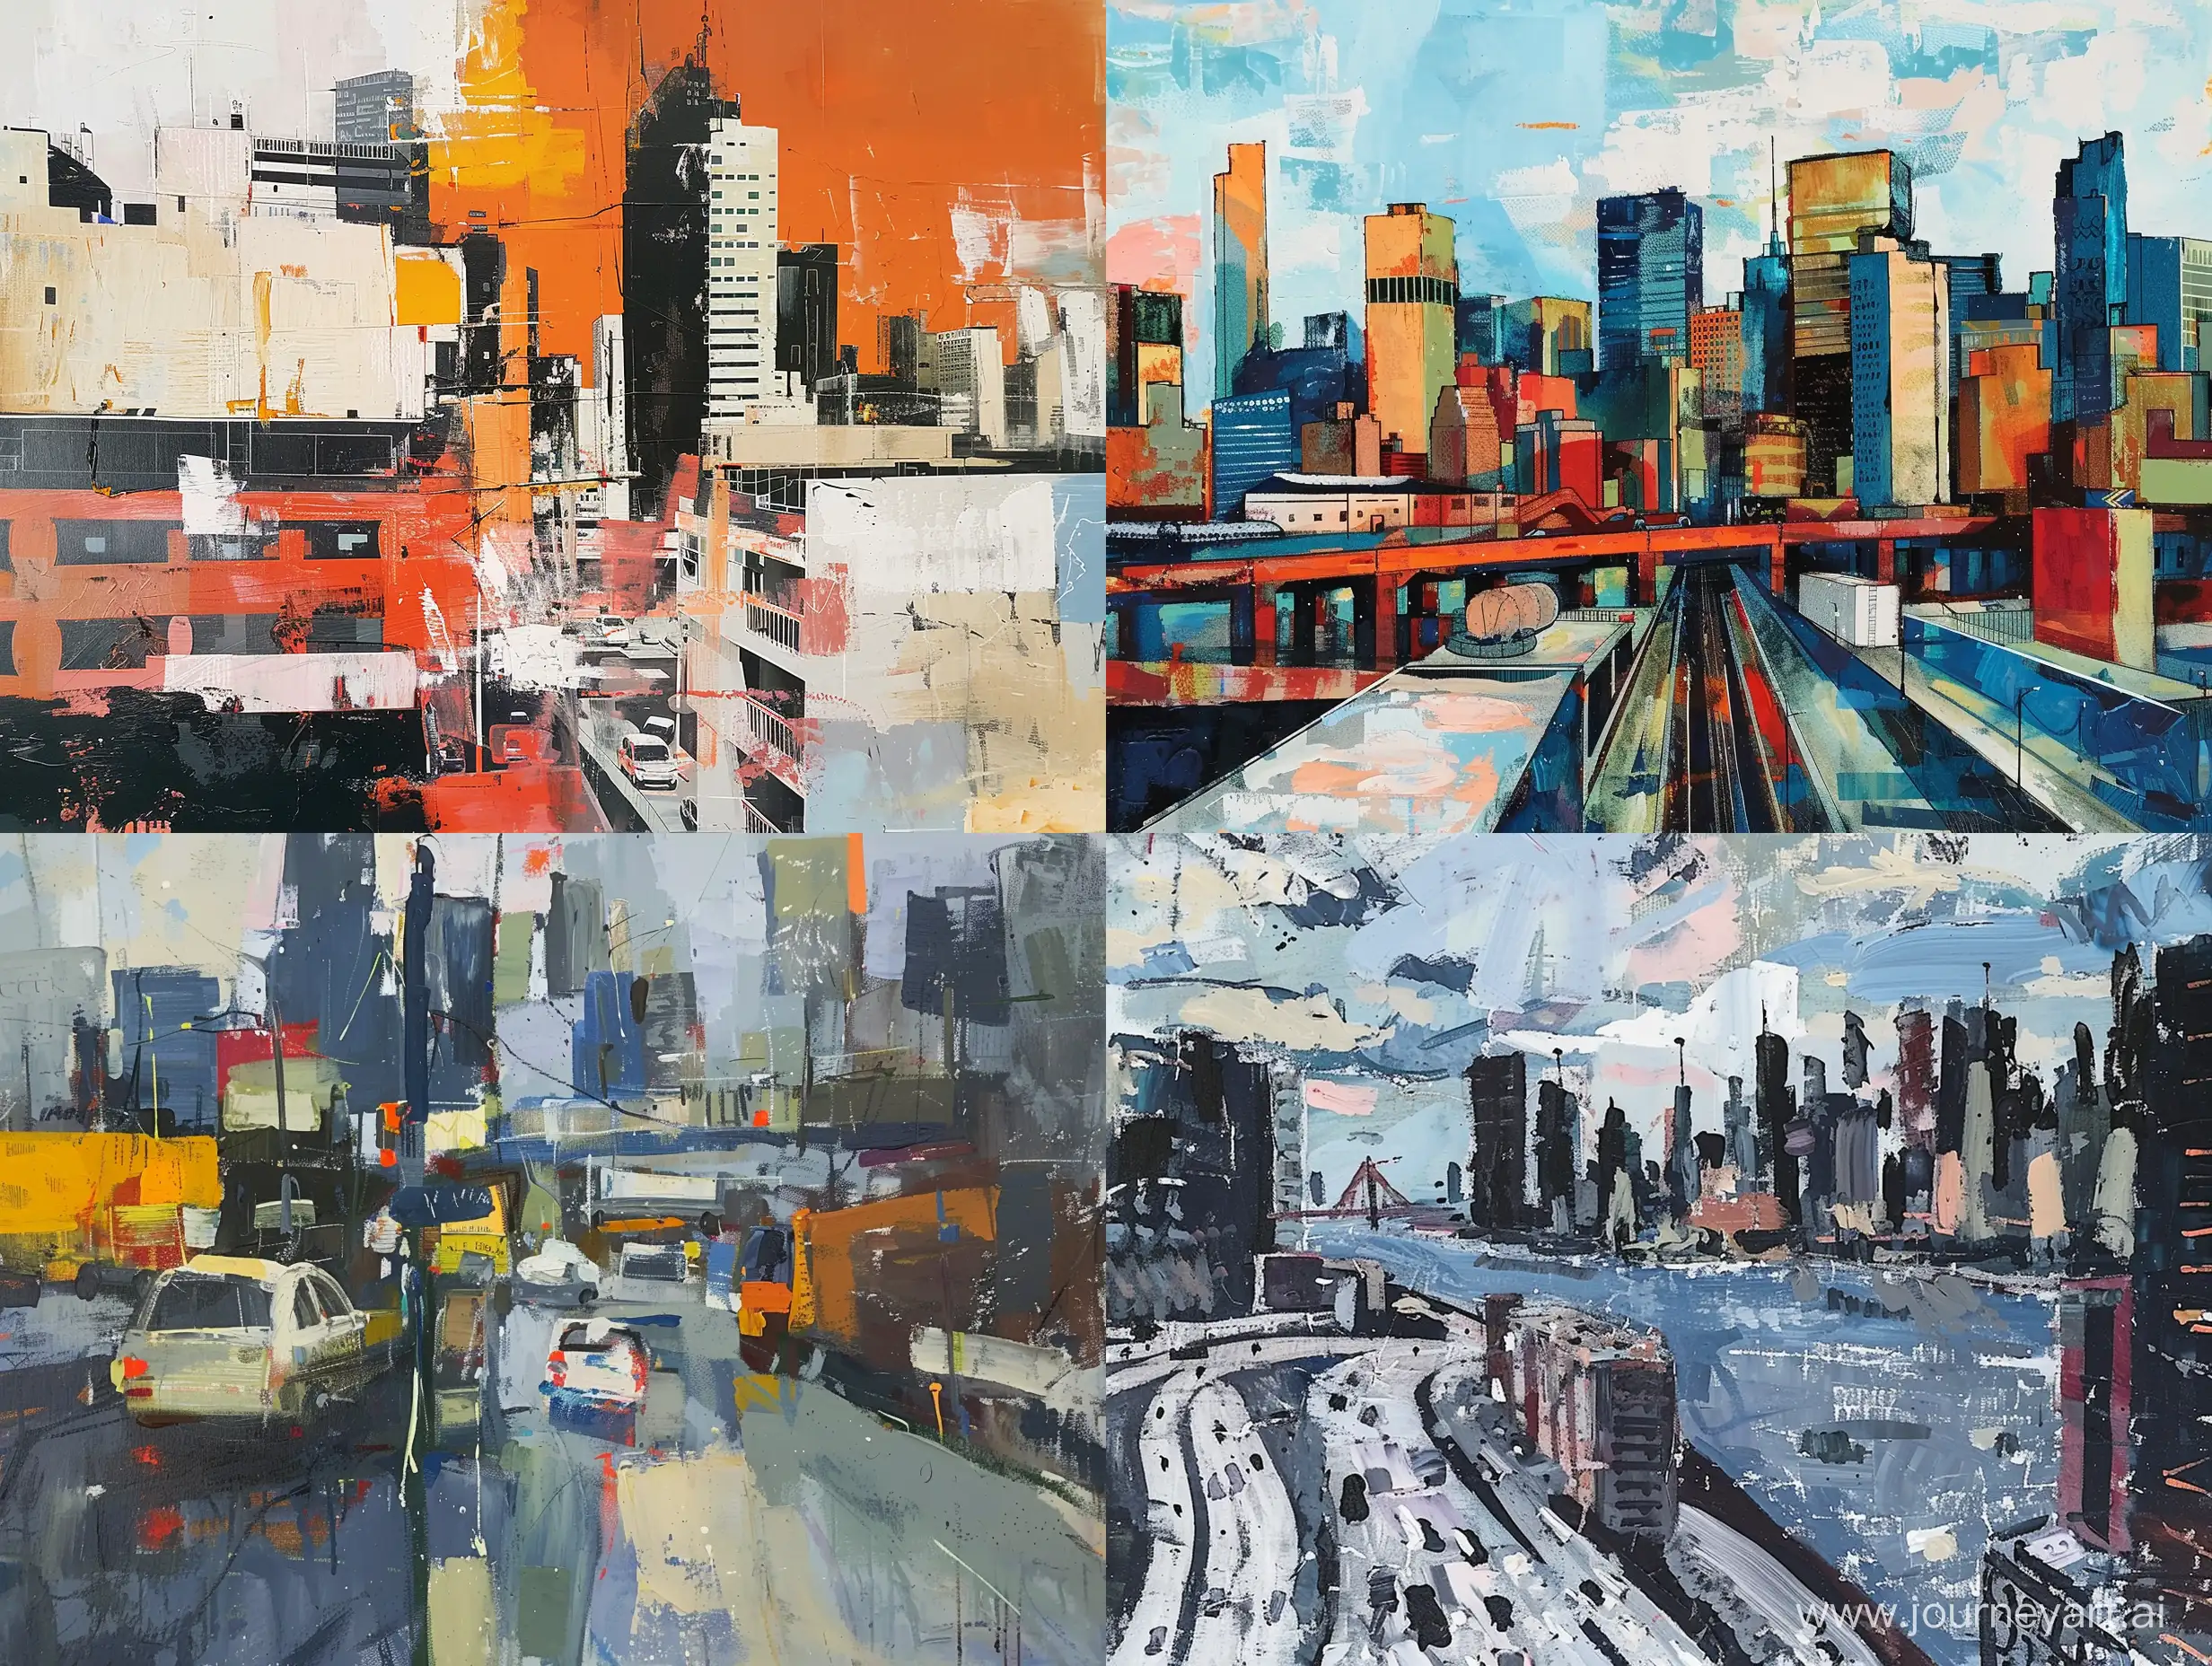 Create a contemporary landscape painting depicting the bustling energy of a modern cityscape, using bold colors and dynamic compositions inspired by the urban landscapes of artist Peter Doig.